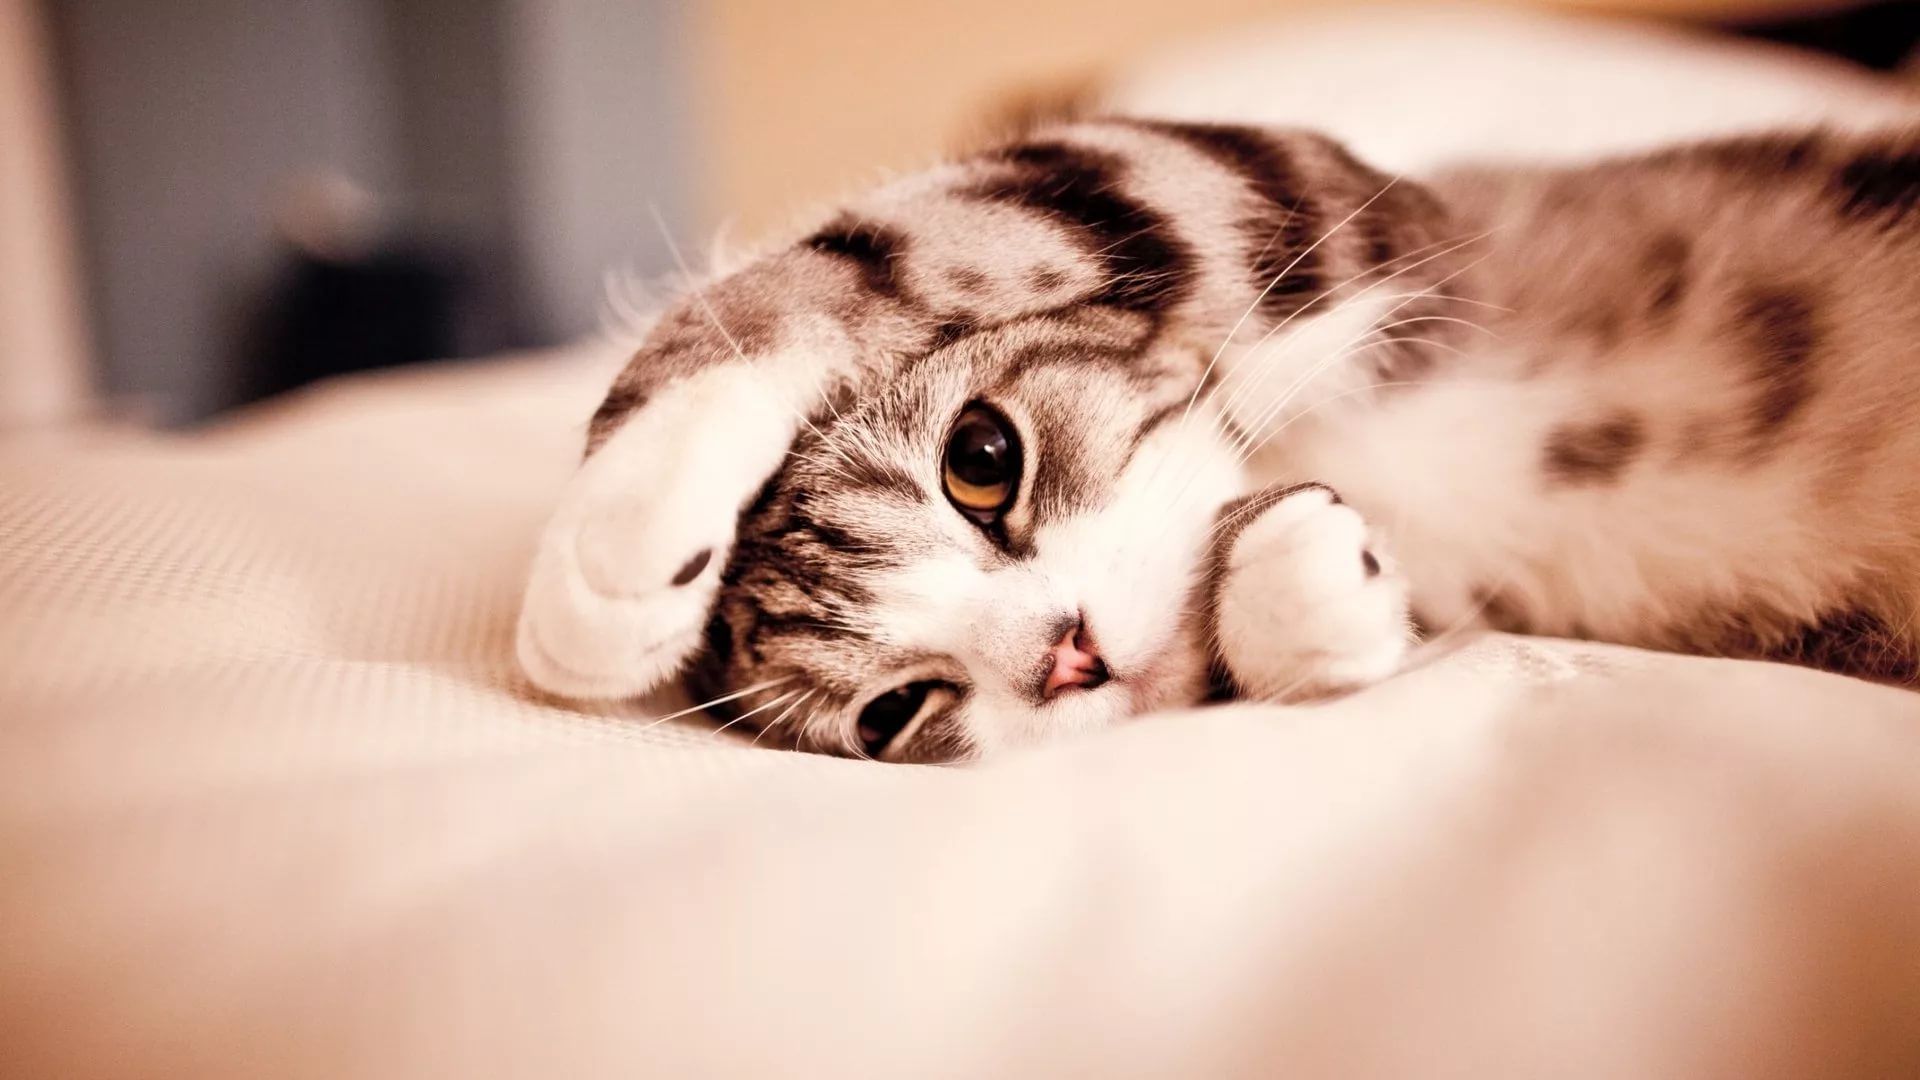 Lovely Cat download free wallpaper image search